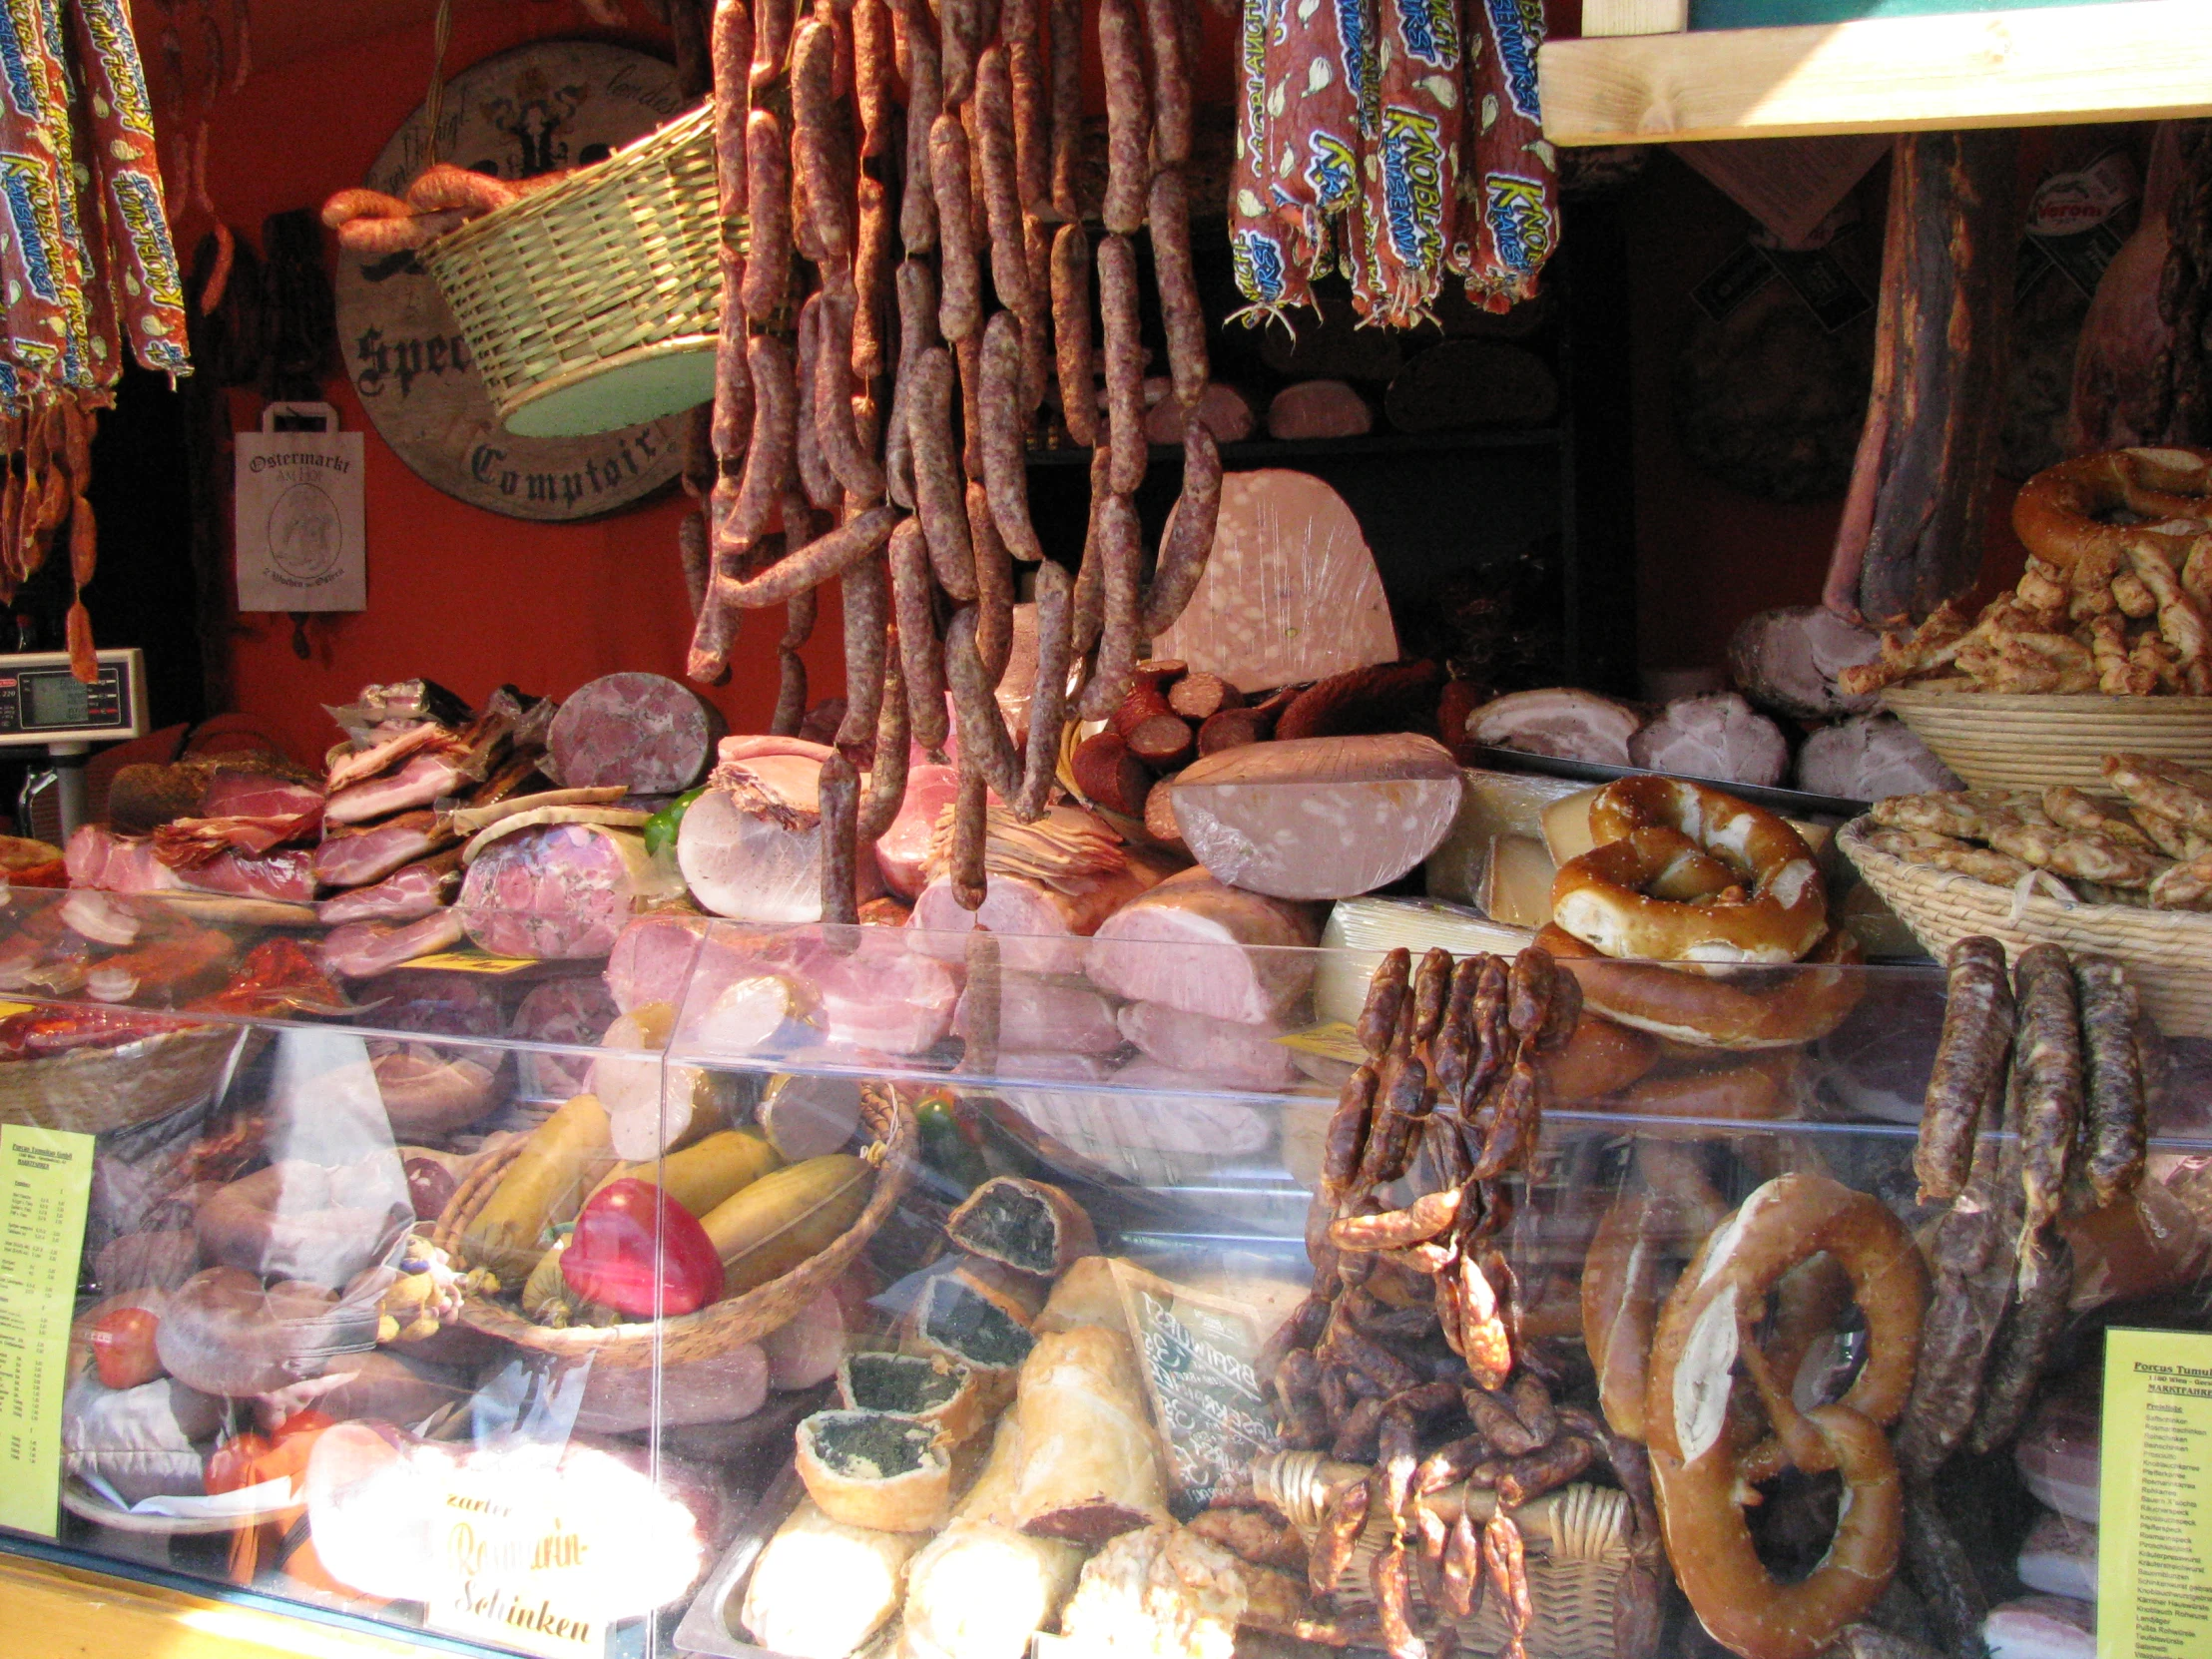 the display of assorted food at a street market